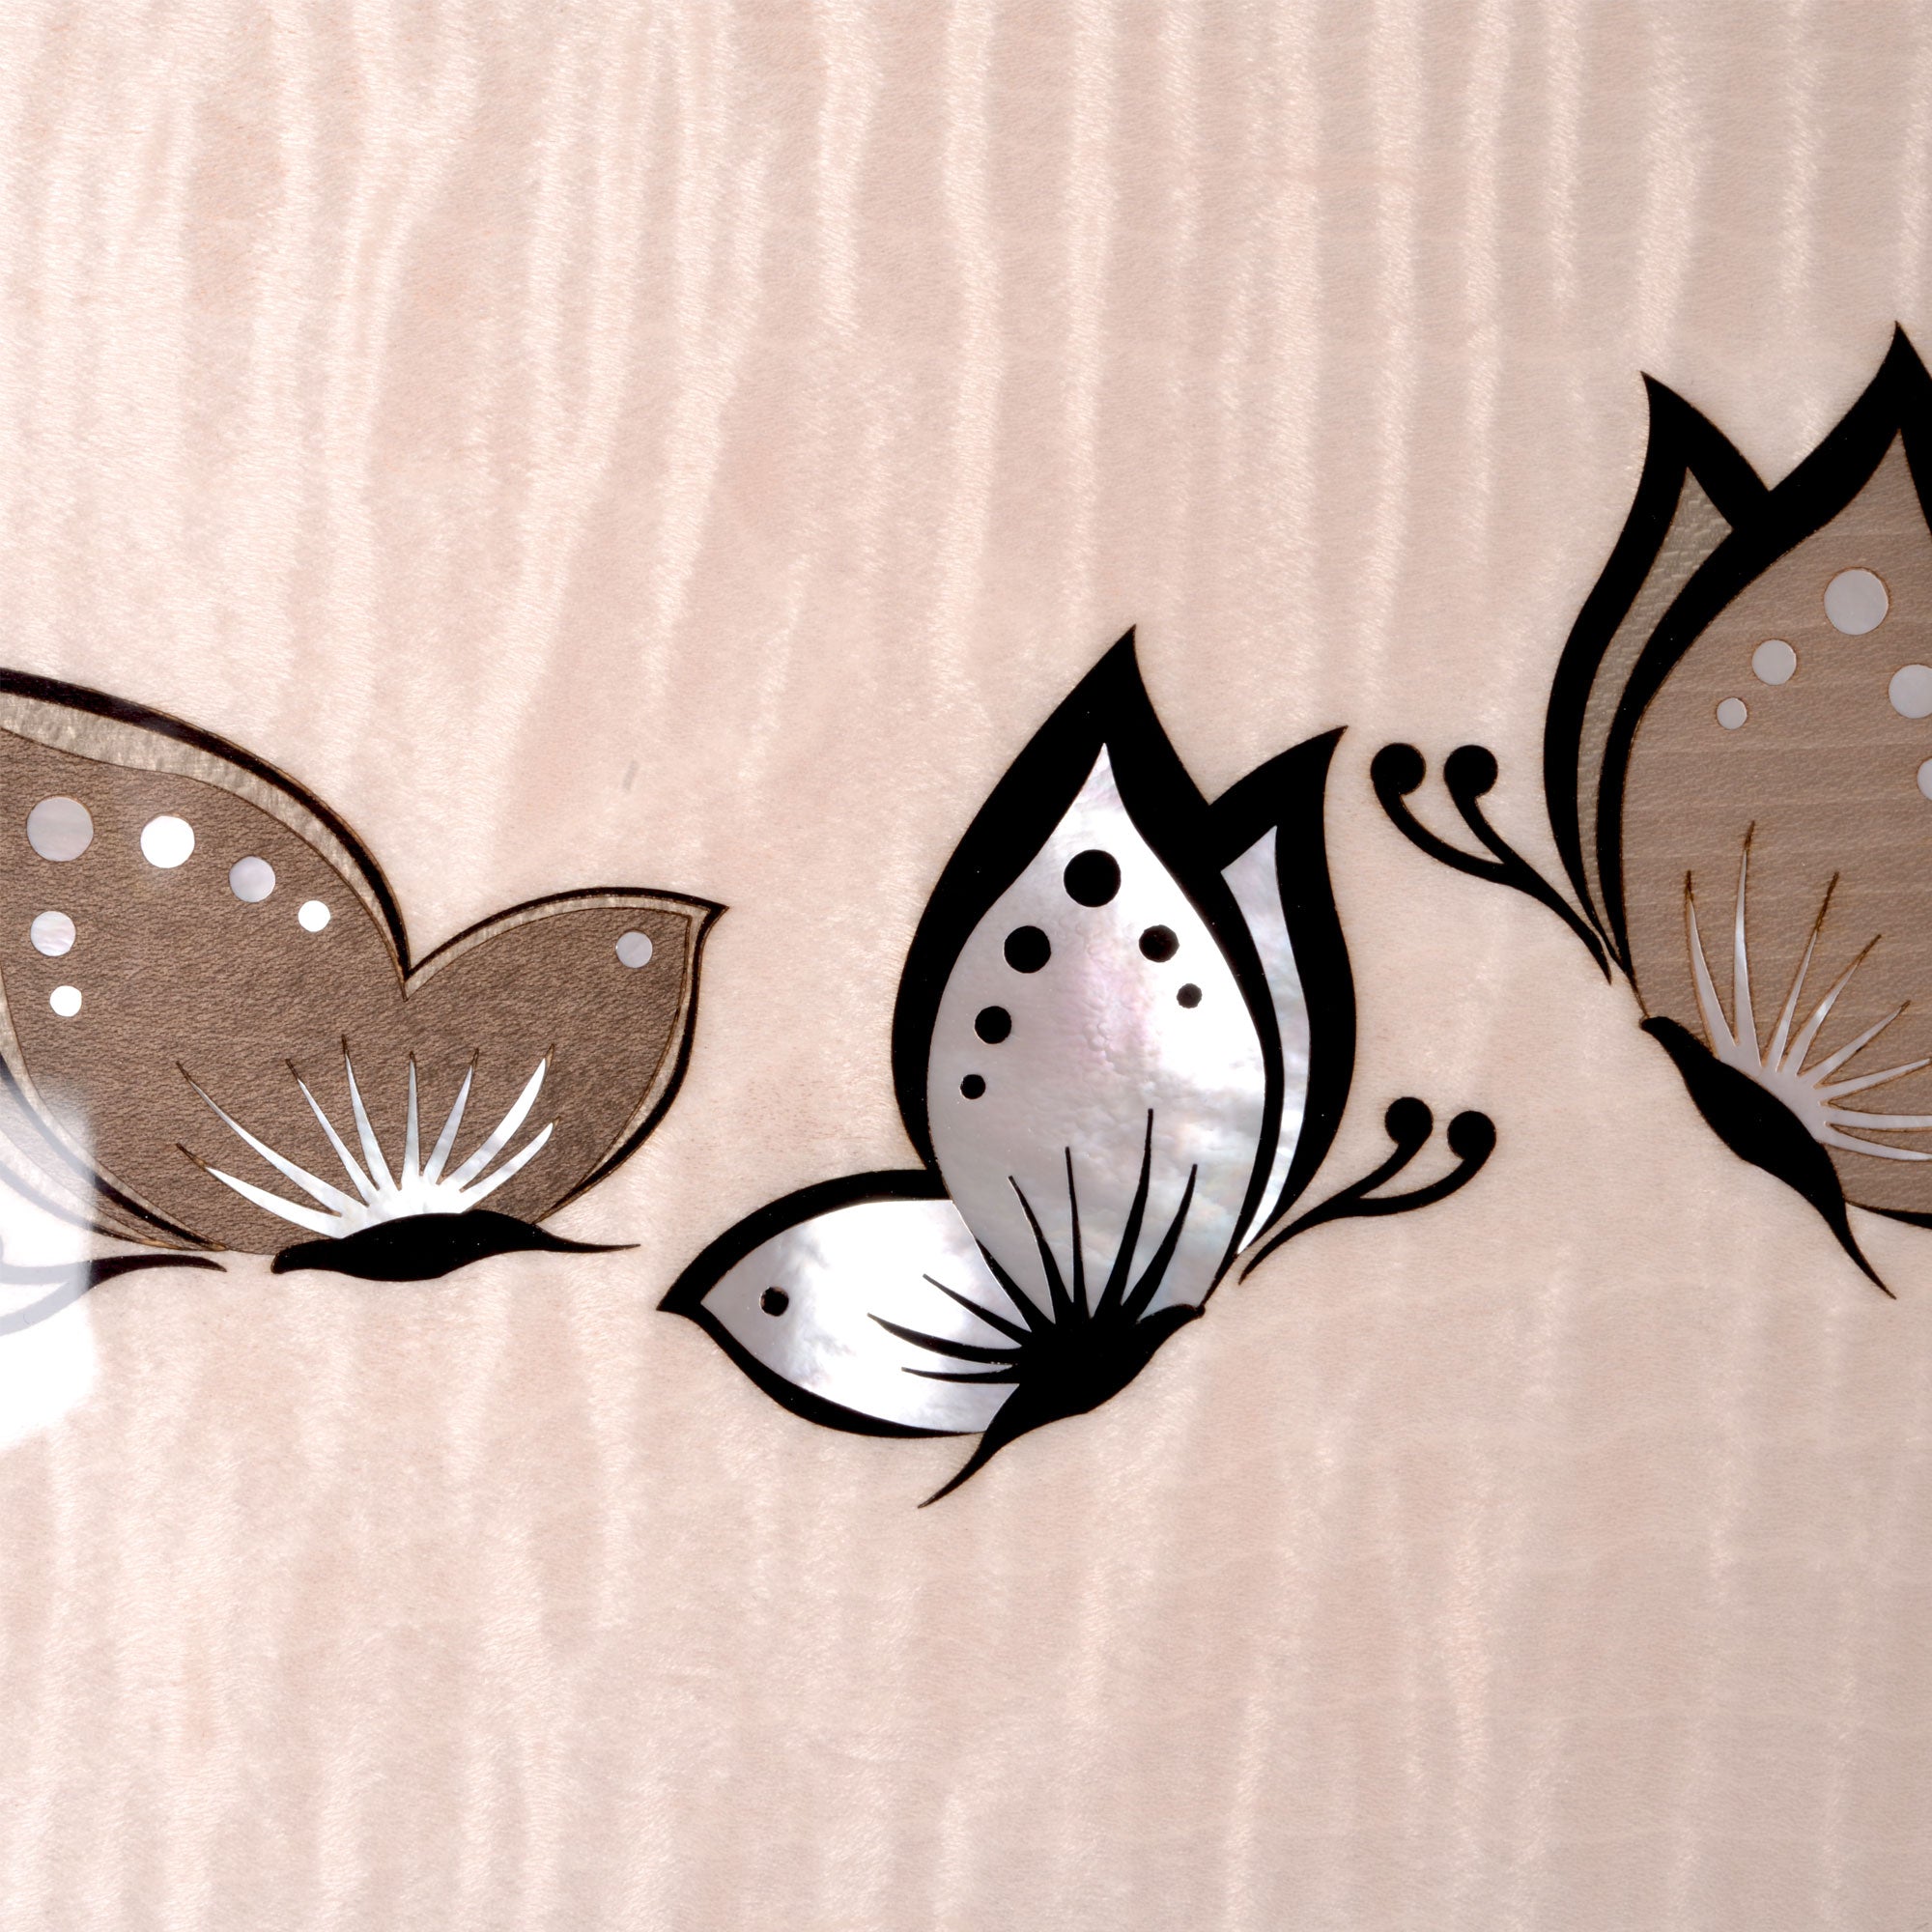 "Butterflies" - Jewelry box in mother of pearl marquetry